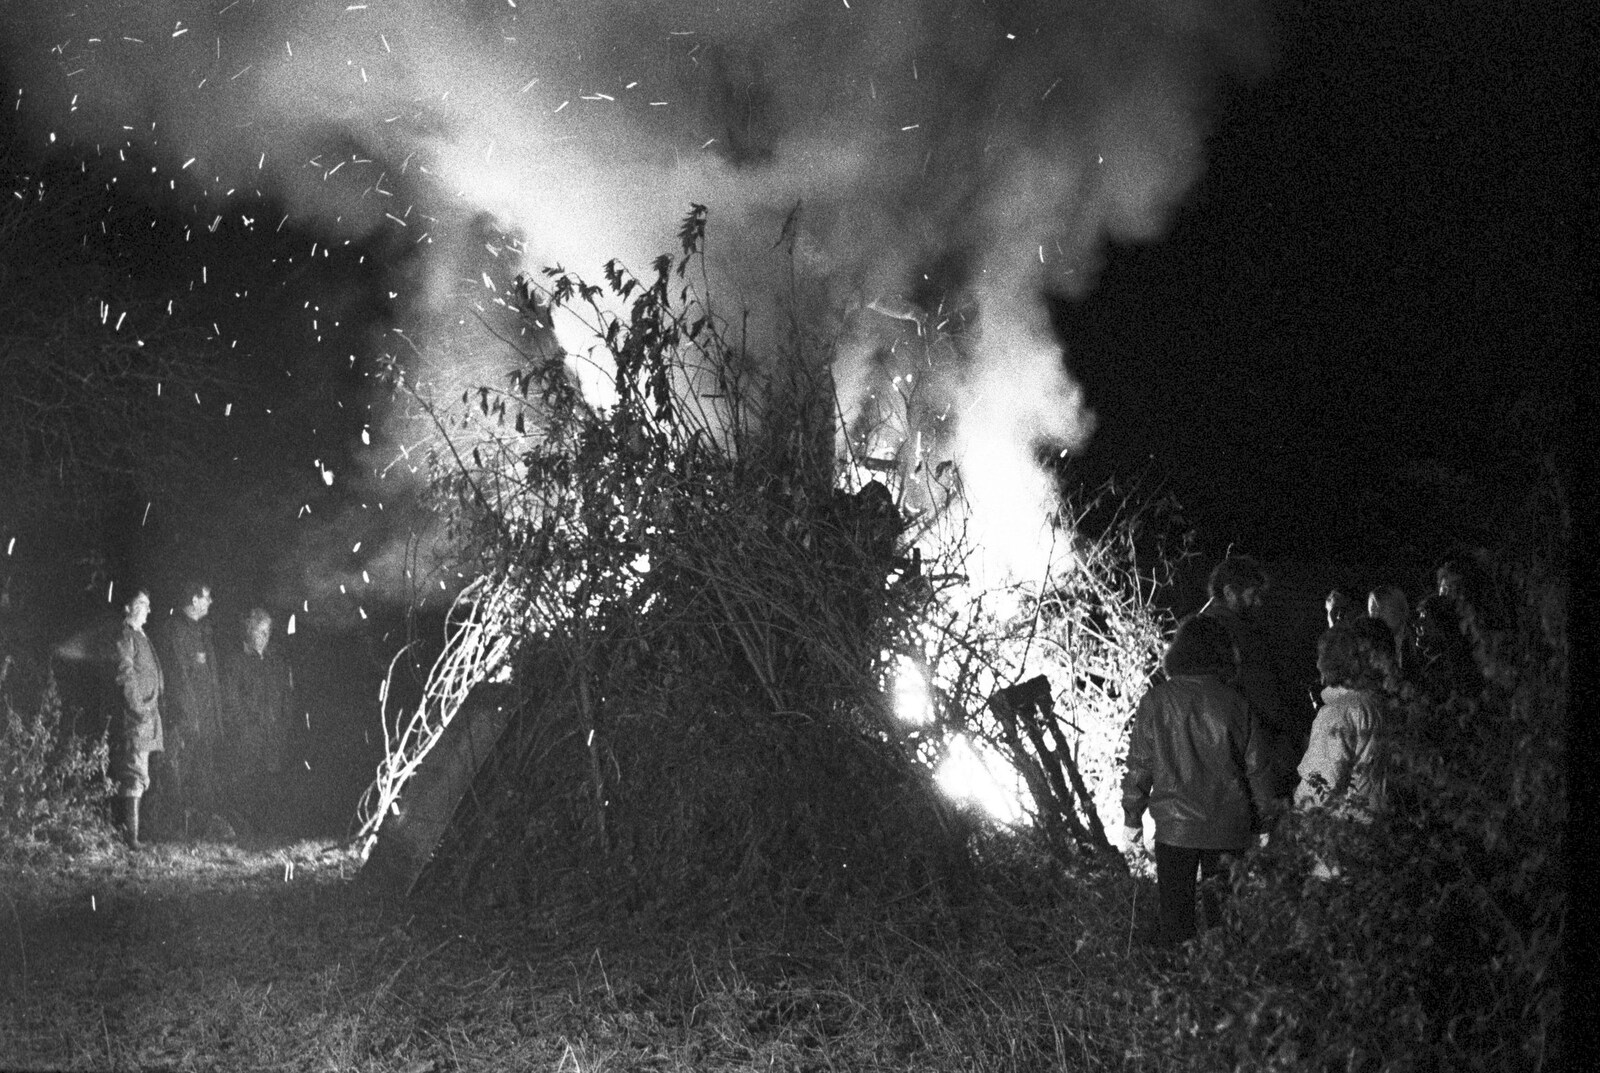 A Black and White Life in Concrete, Stuston, Suffolk - 3rd September 1992: A raging bonfire